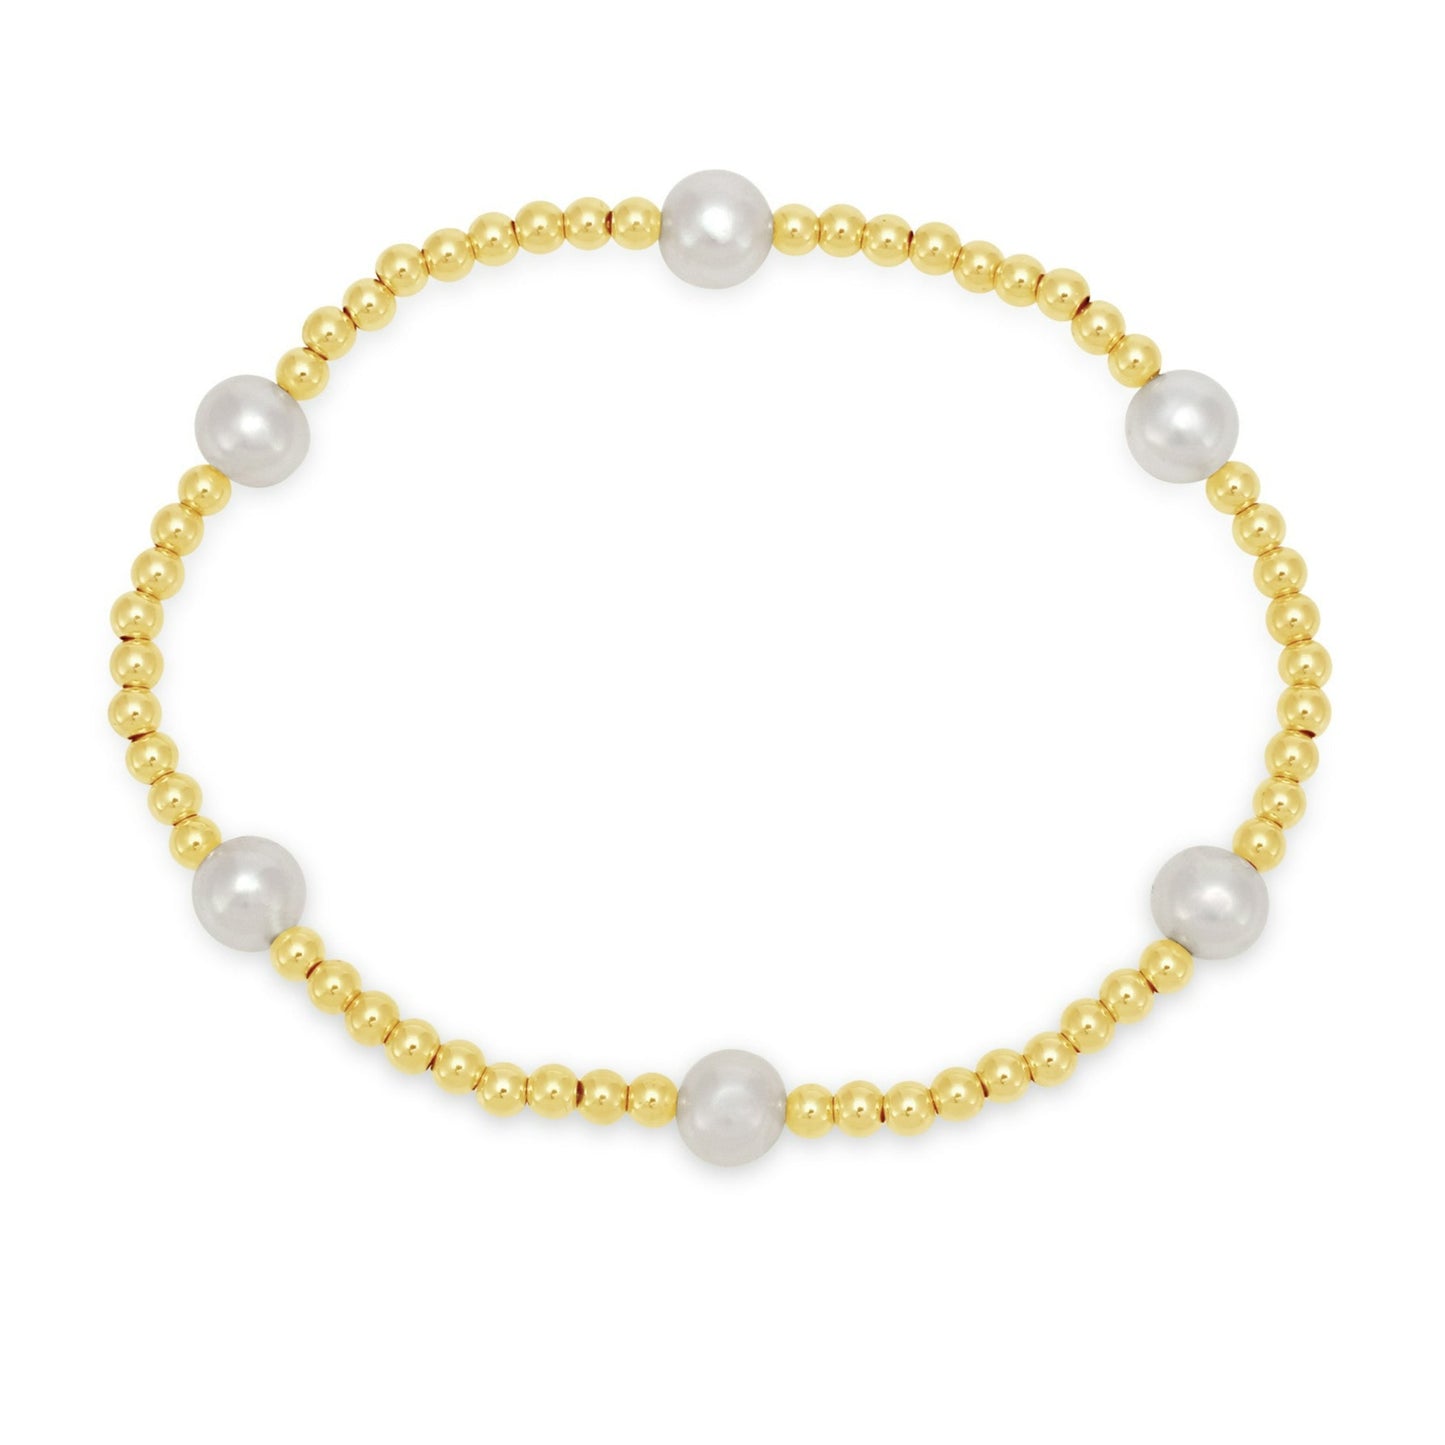 Credo Gold Colour Bead Bracelet With Cultured Freshwater Pearls